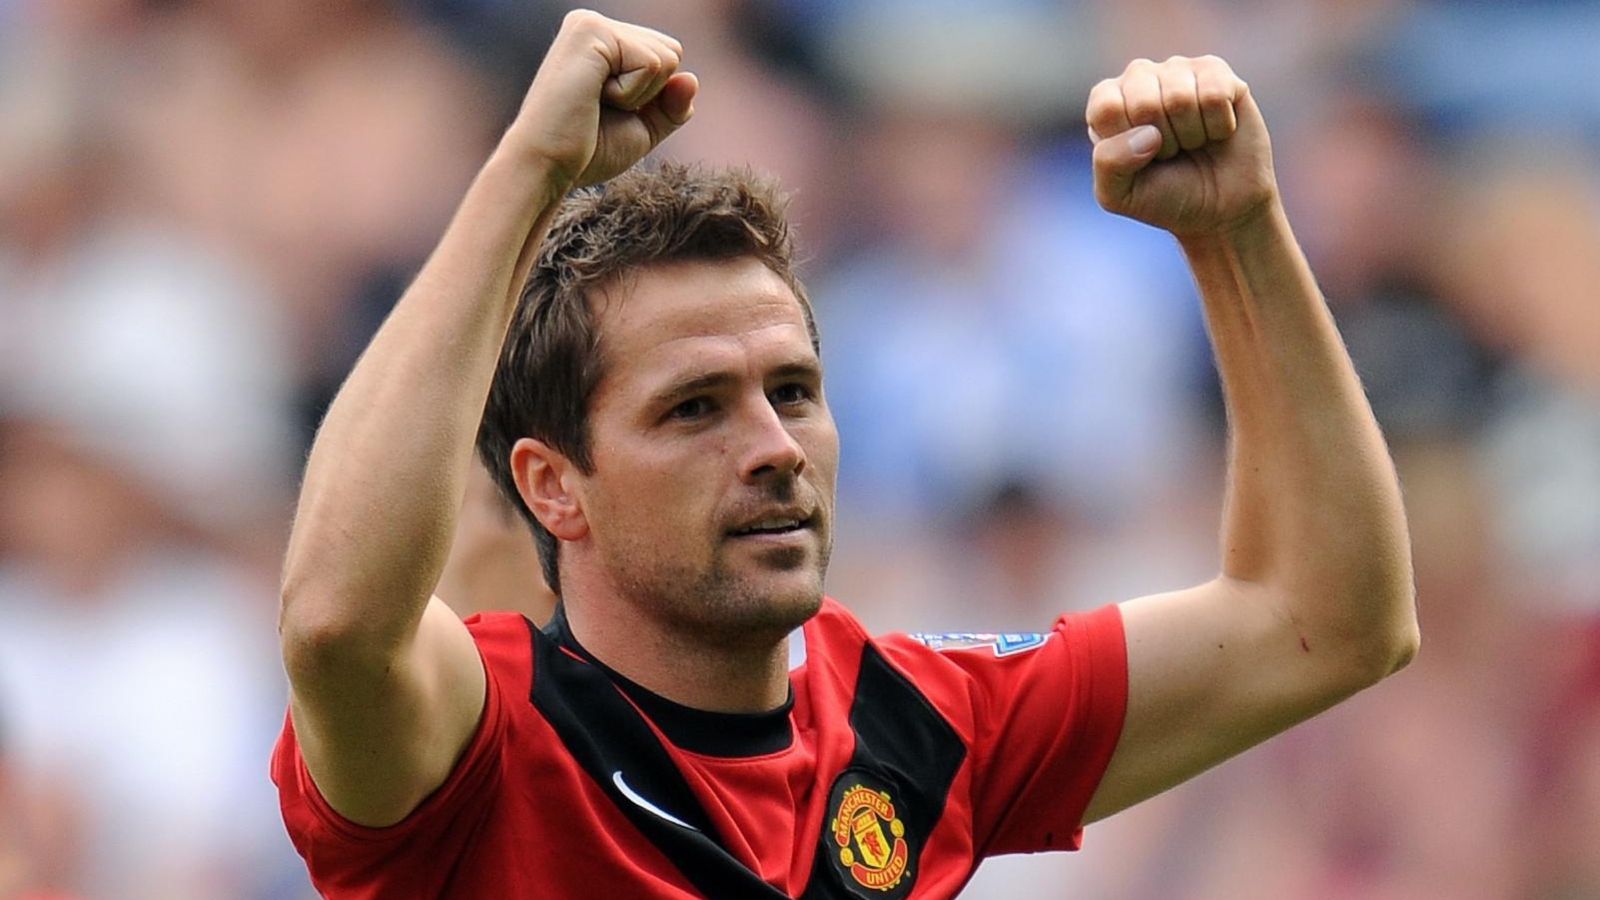 Michael Owen at Manchester United: Worth it just for *that* derby winner